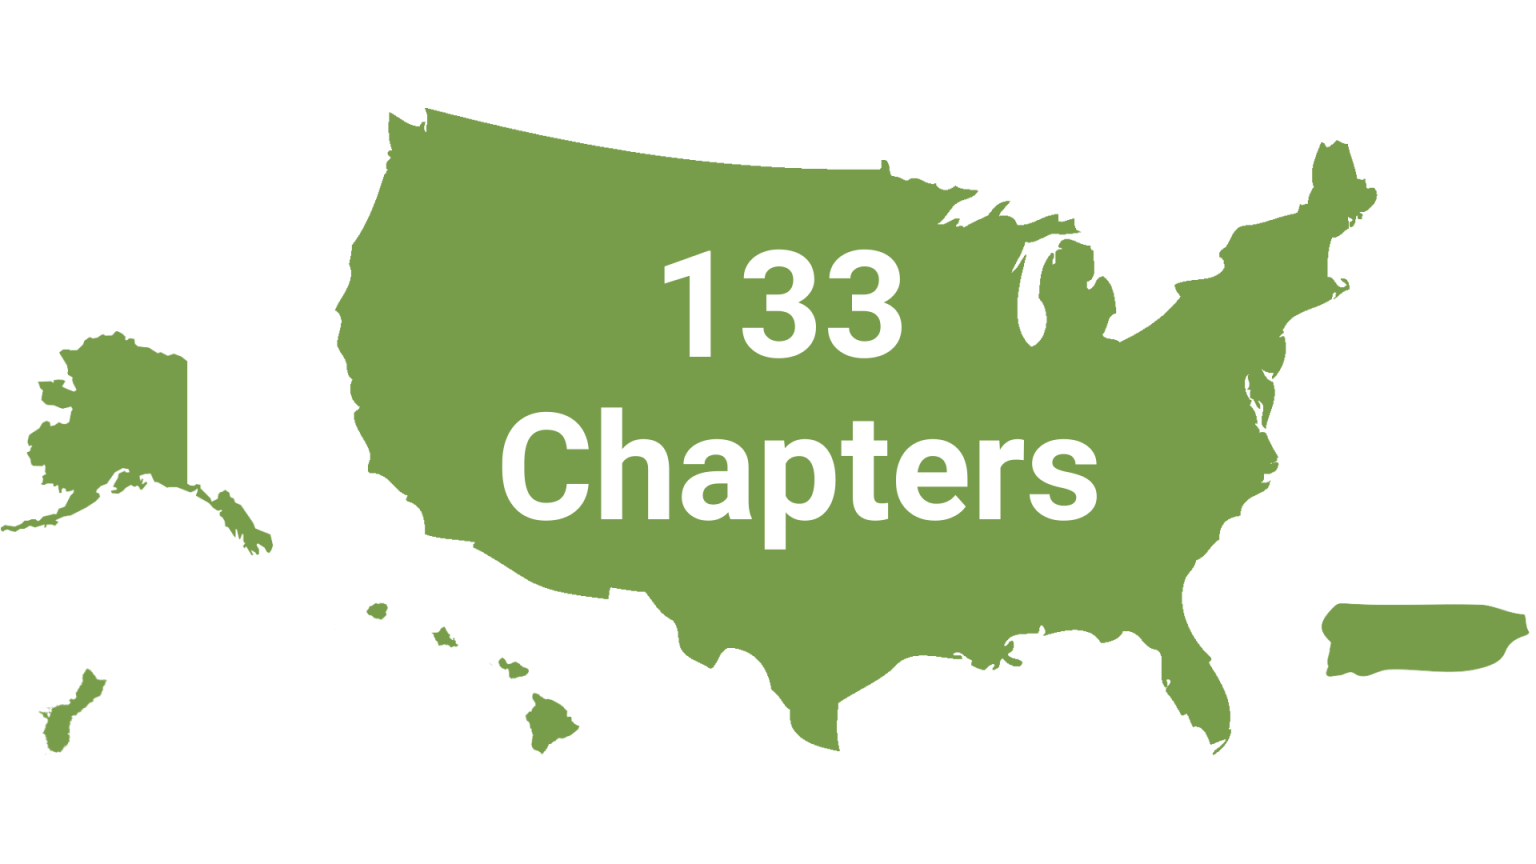 Official-SACNAS-Chapters-Map-133-Chapters-1536x864